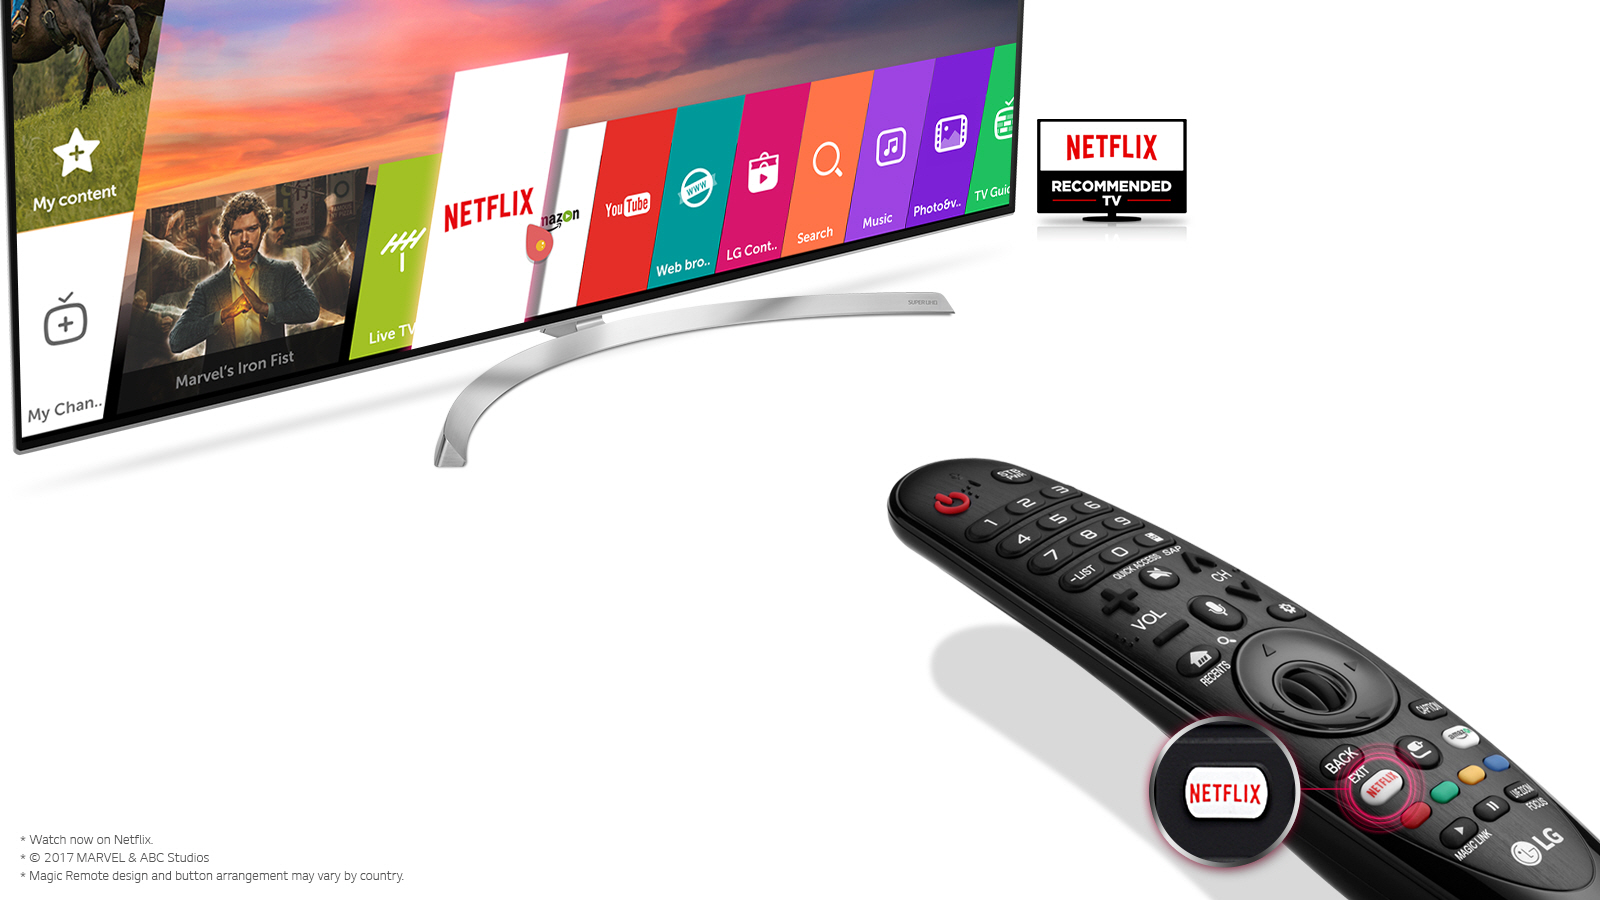 Get FREE 3 Months of Netflix with Your LG TV!